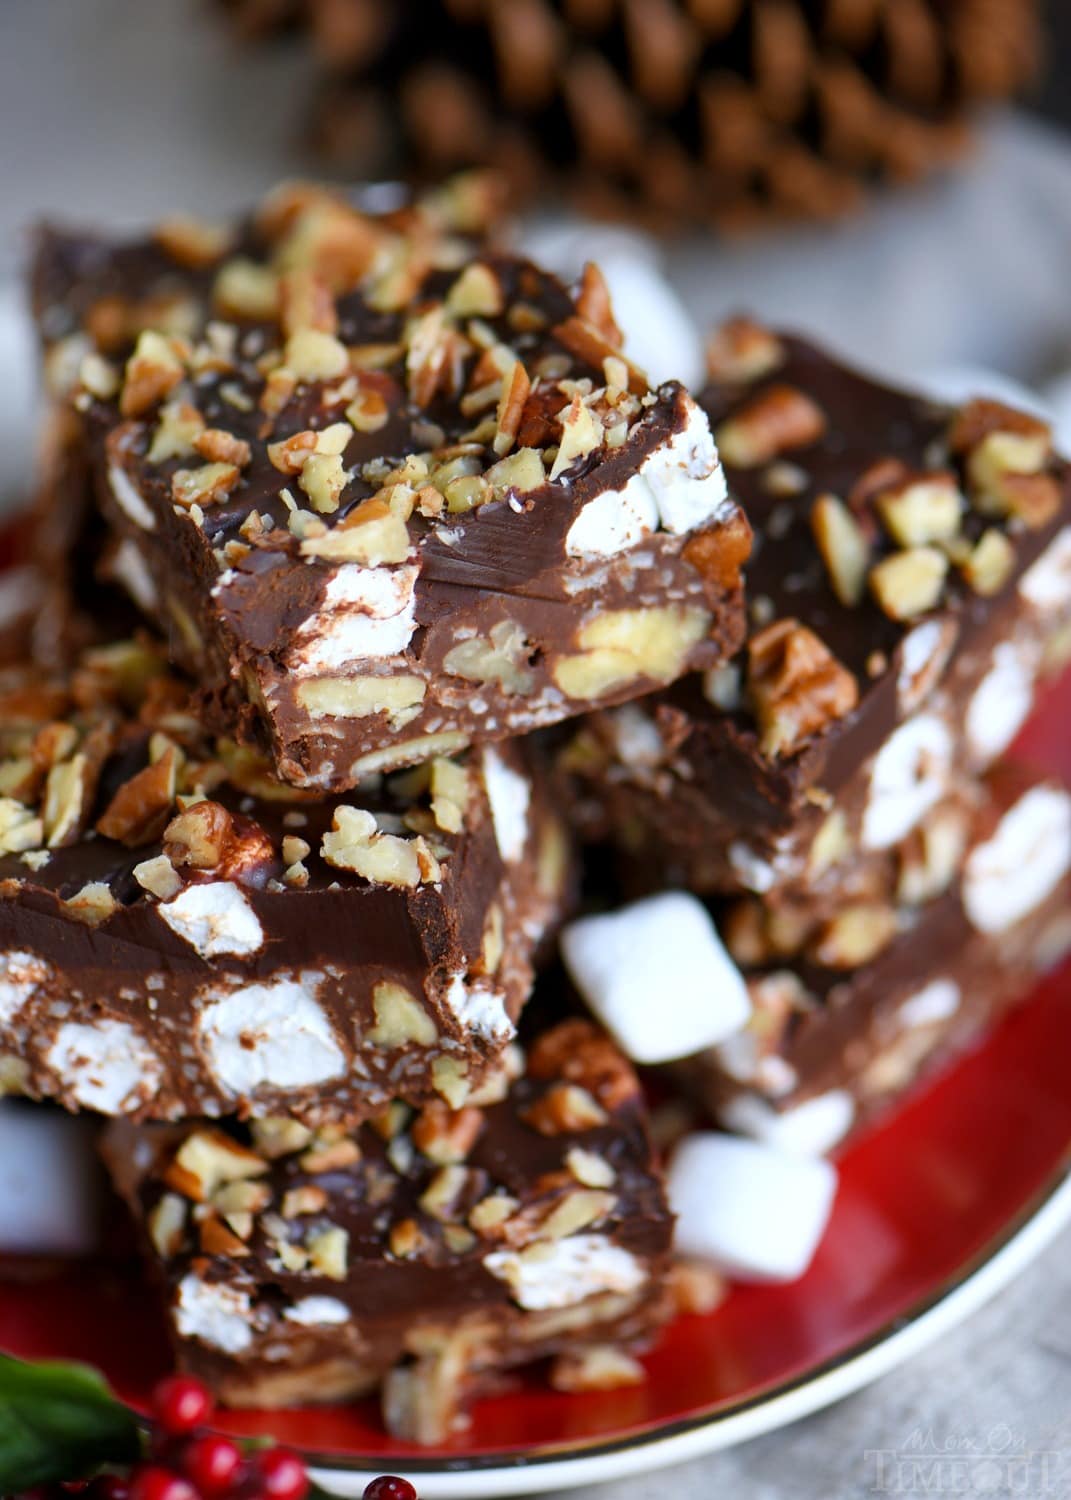 Heavenly Hash Truffle Bars are loaded with coconut, pecans, marshmallows and chocolate and topped with a decadent ganache. This incredibly easy treat comes together in minutes and is sure to impress the chocolate lover in your life! Perfect for the holidays!